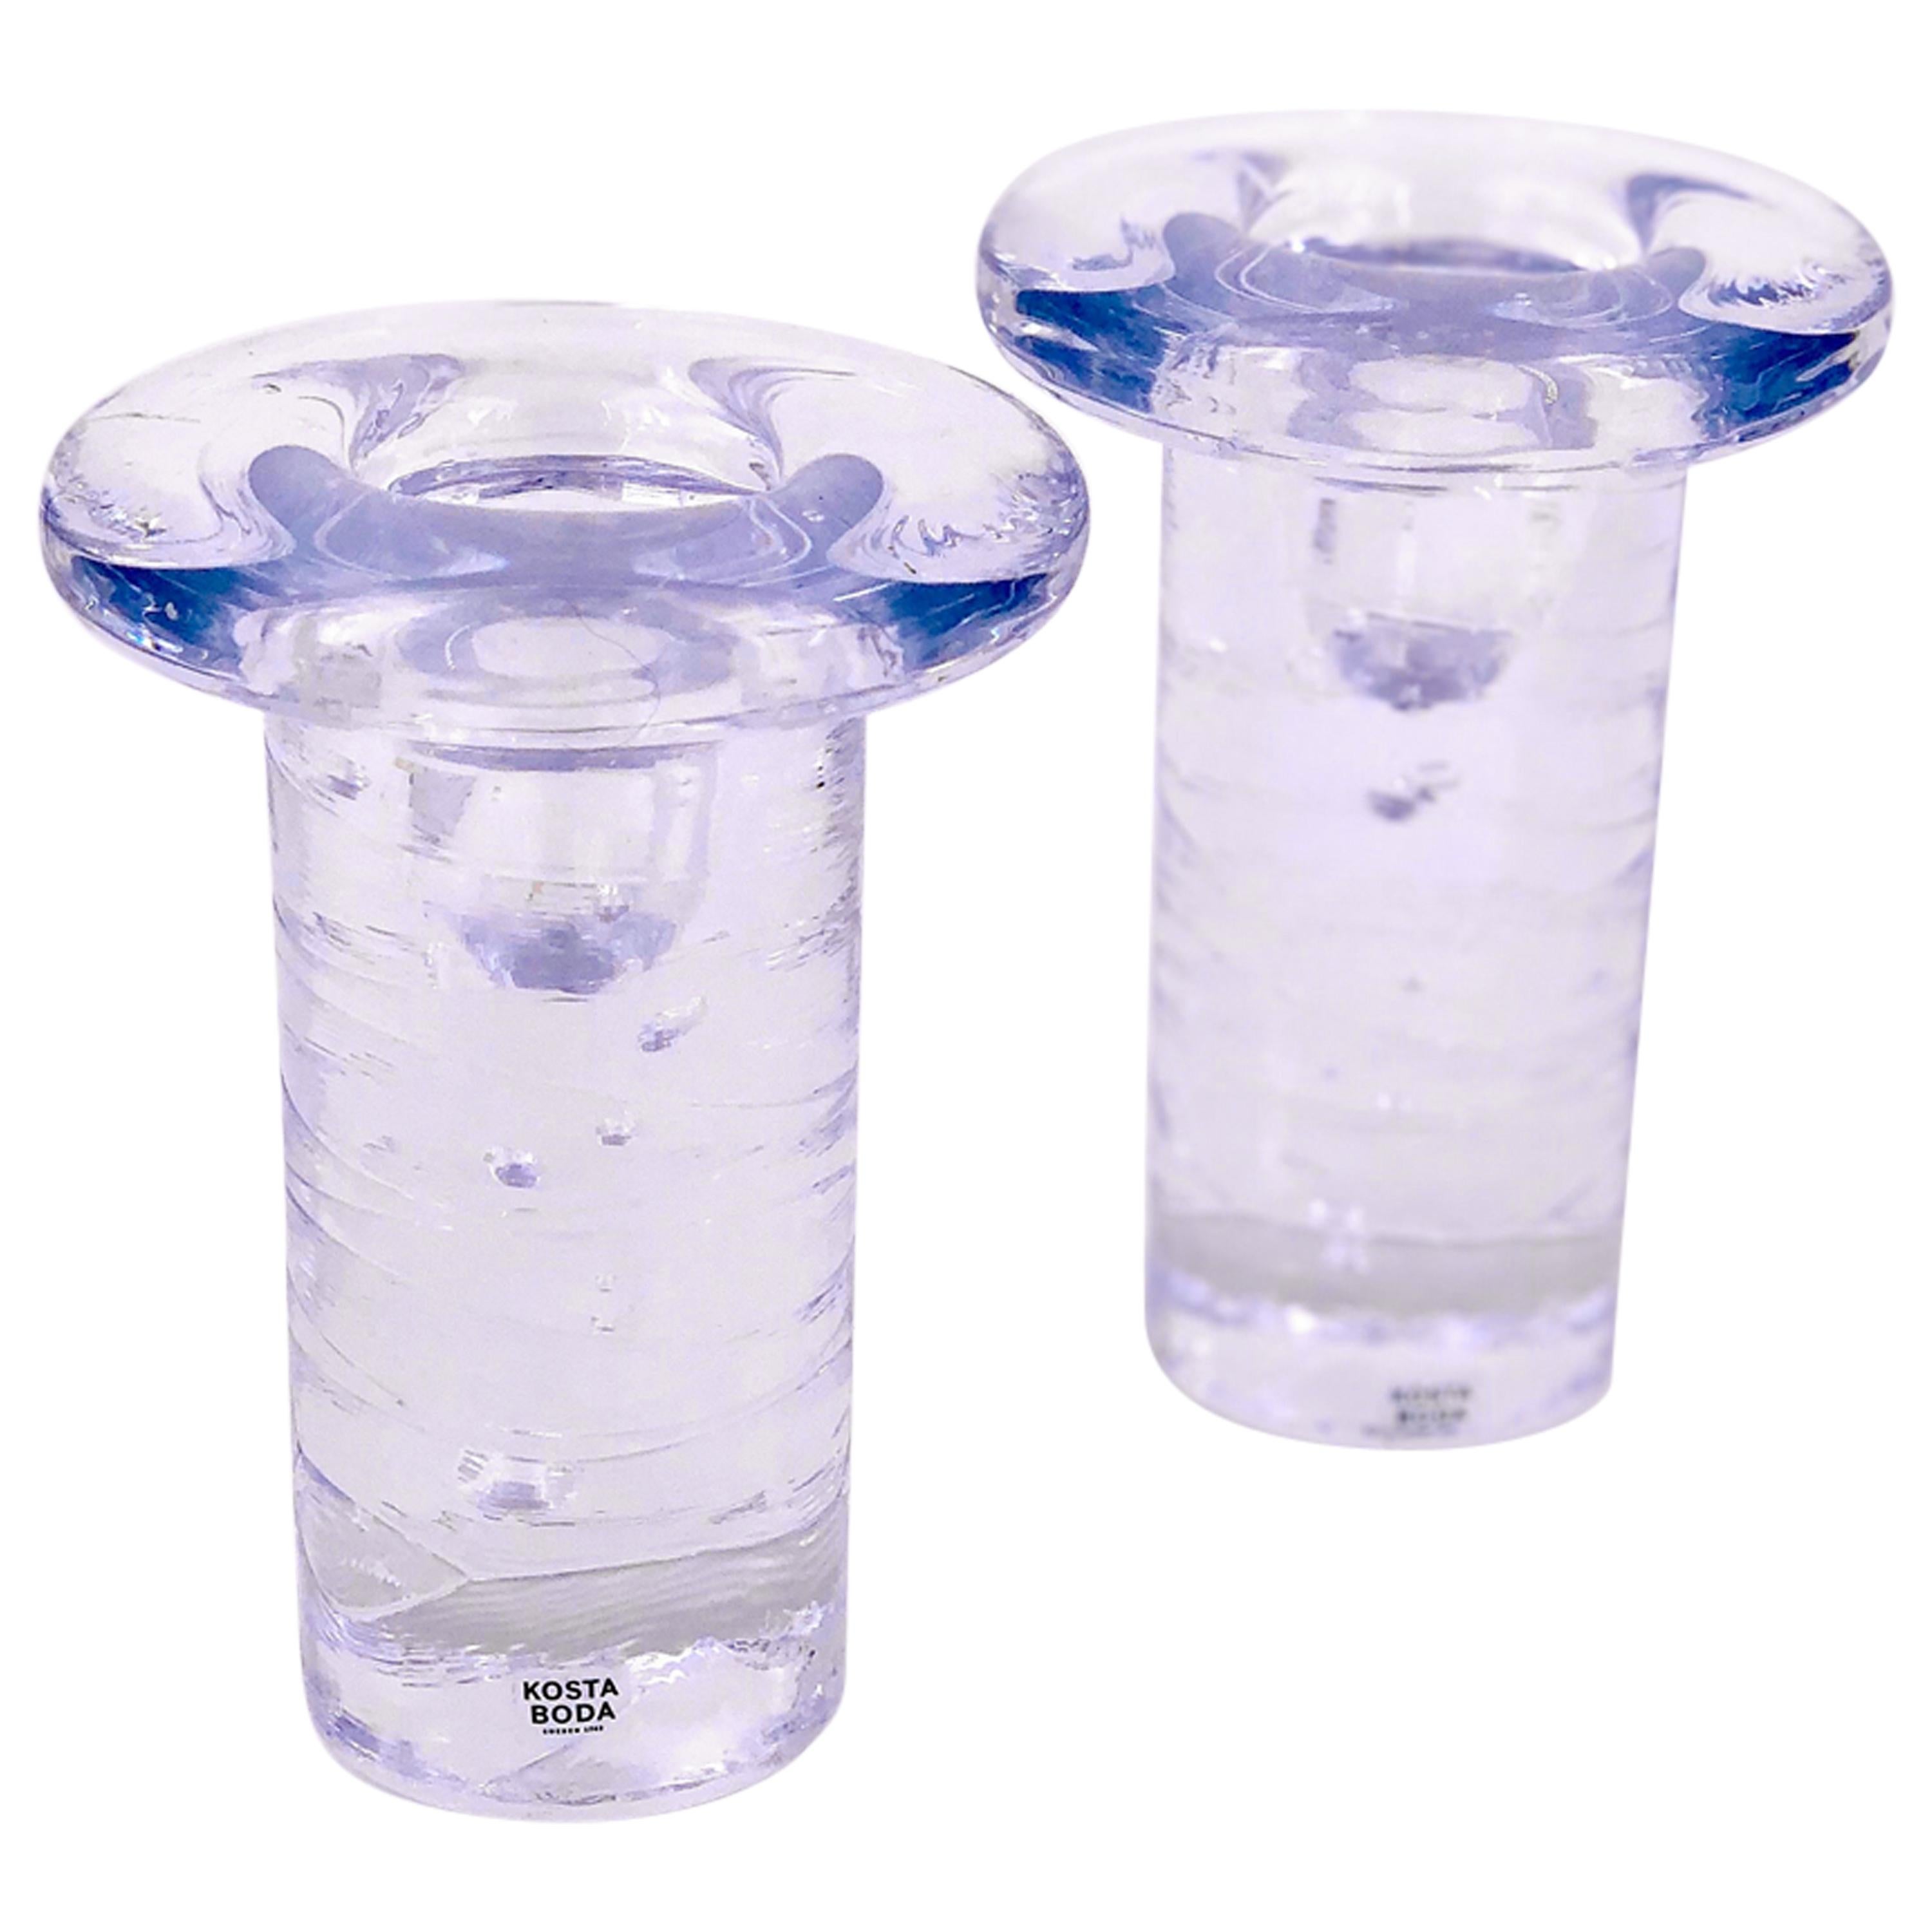 Pair of Solid Clear Glass Candleholders by Kosta Boda